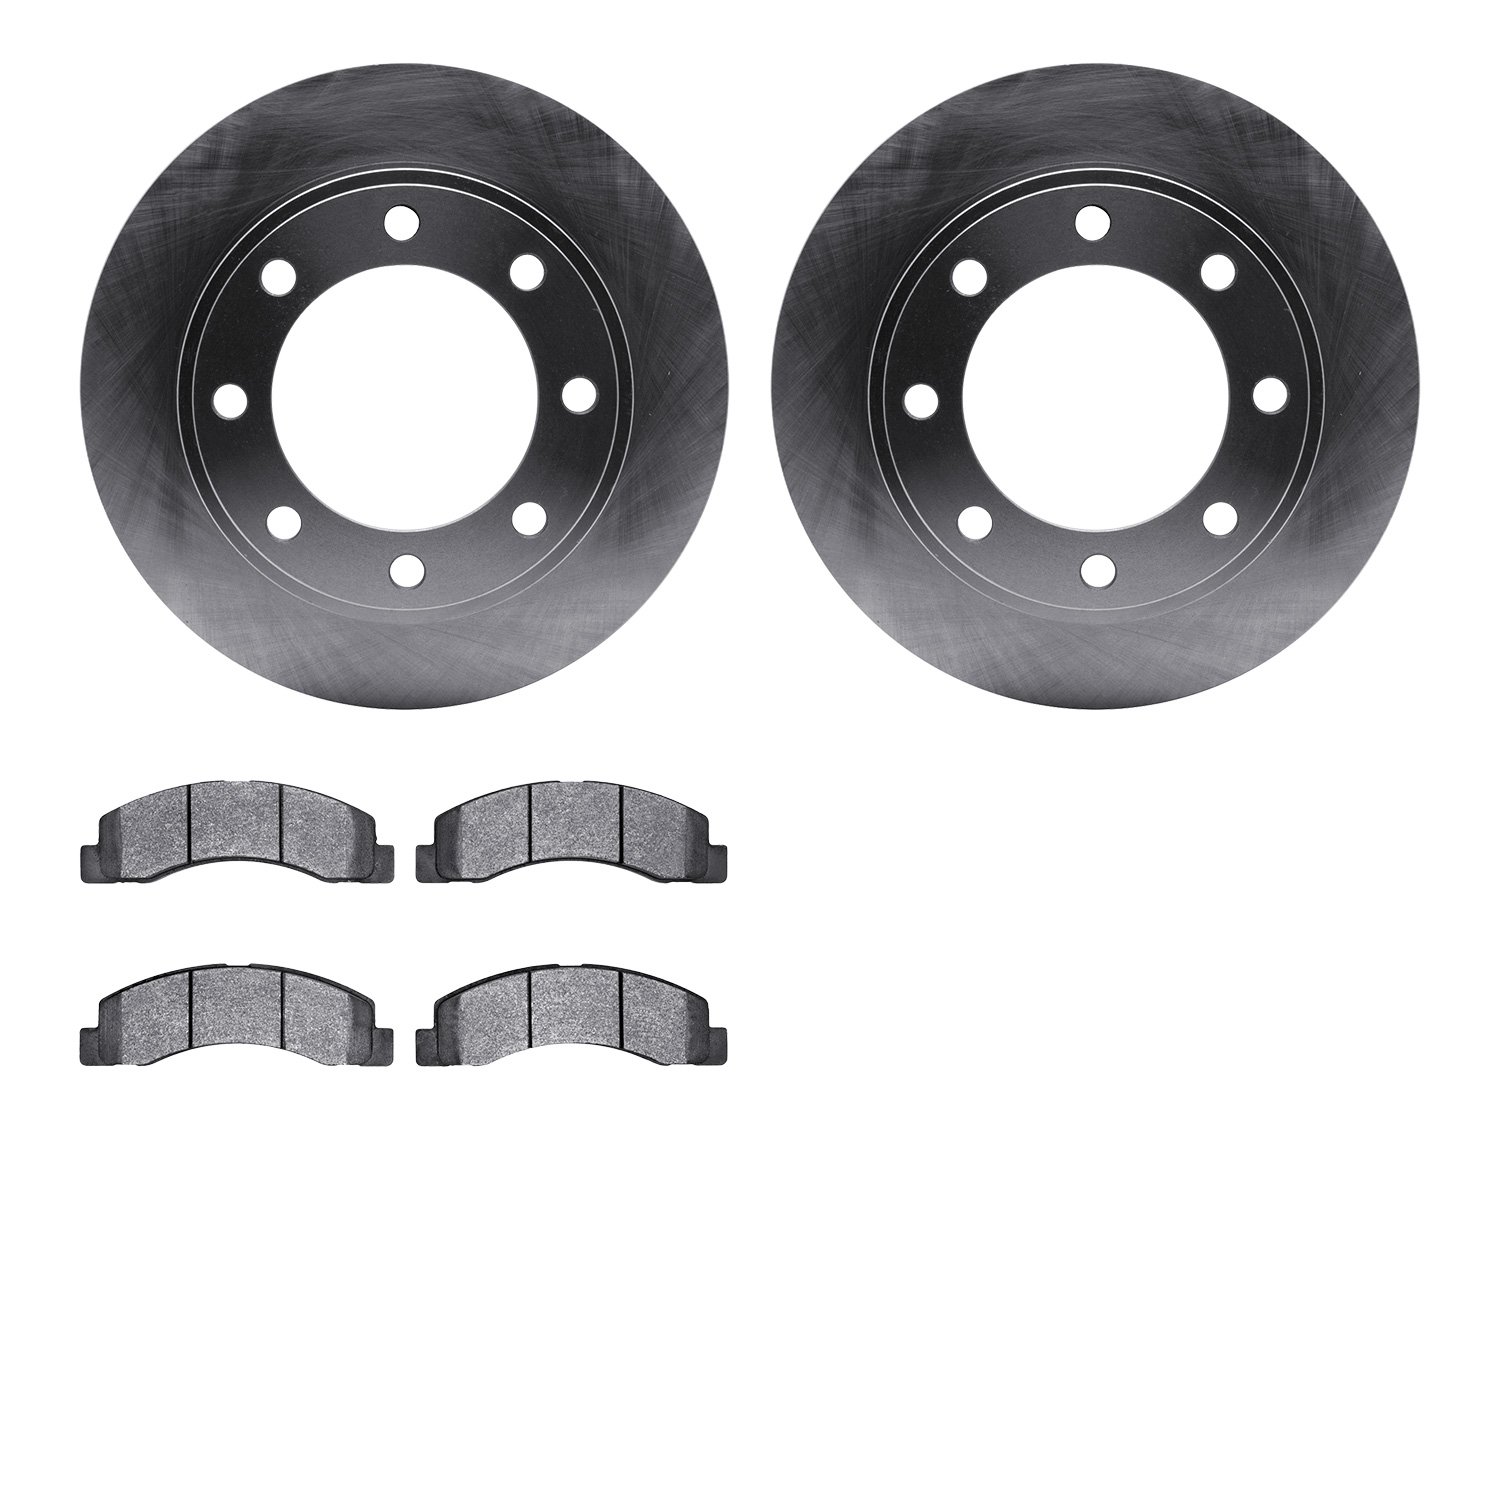 6402-54125 Brake Rotors with Ultimate-Duty Brake Pads, 1999-1999 Ford/Lincoln/Mercury/Mazda, Position: Front